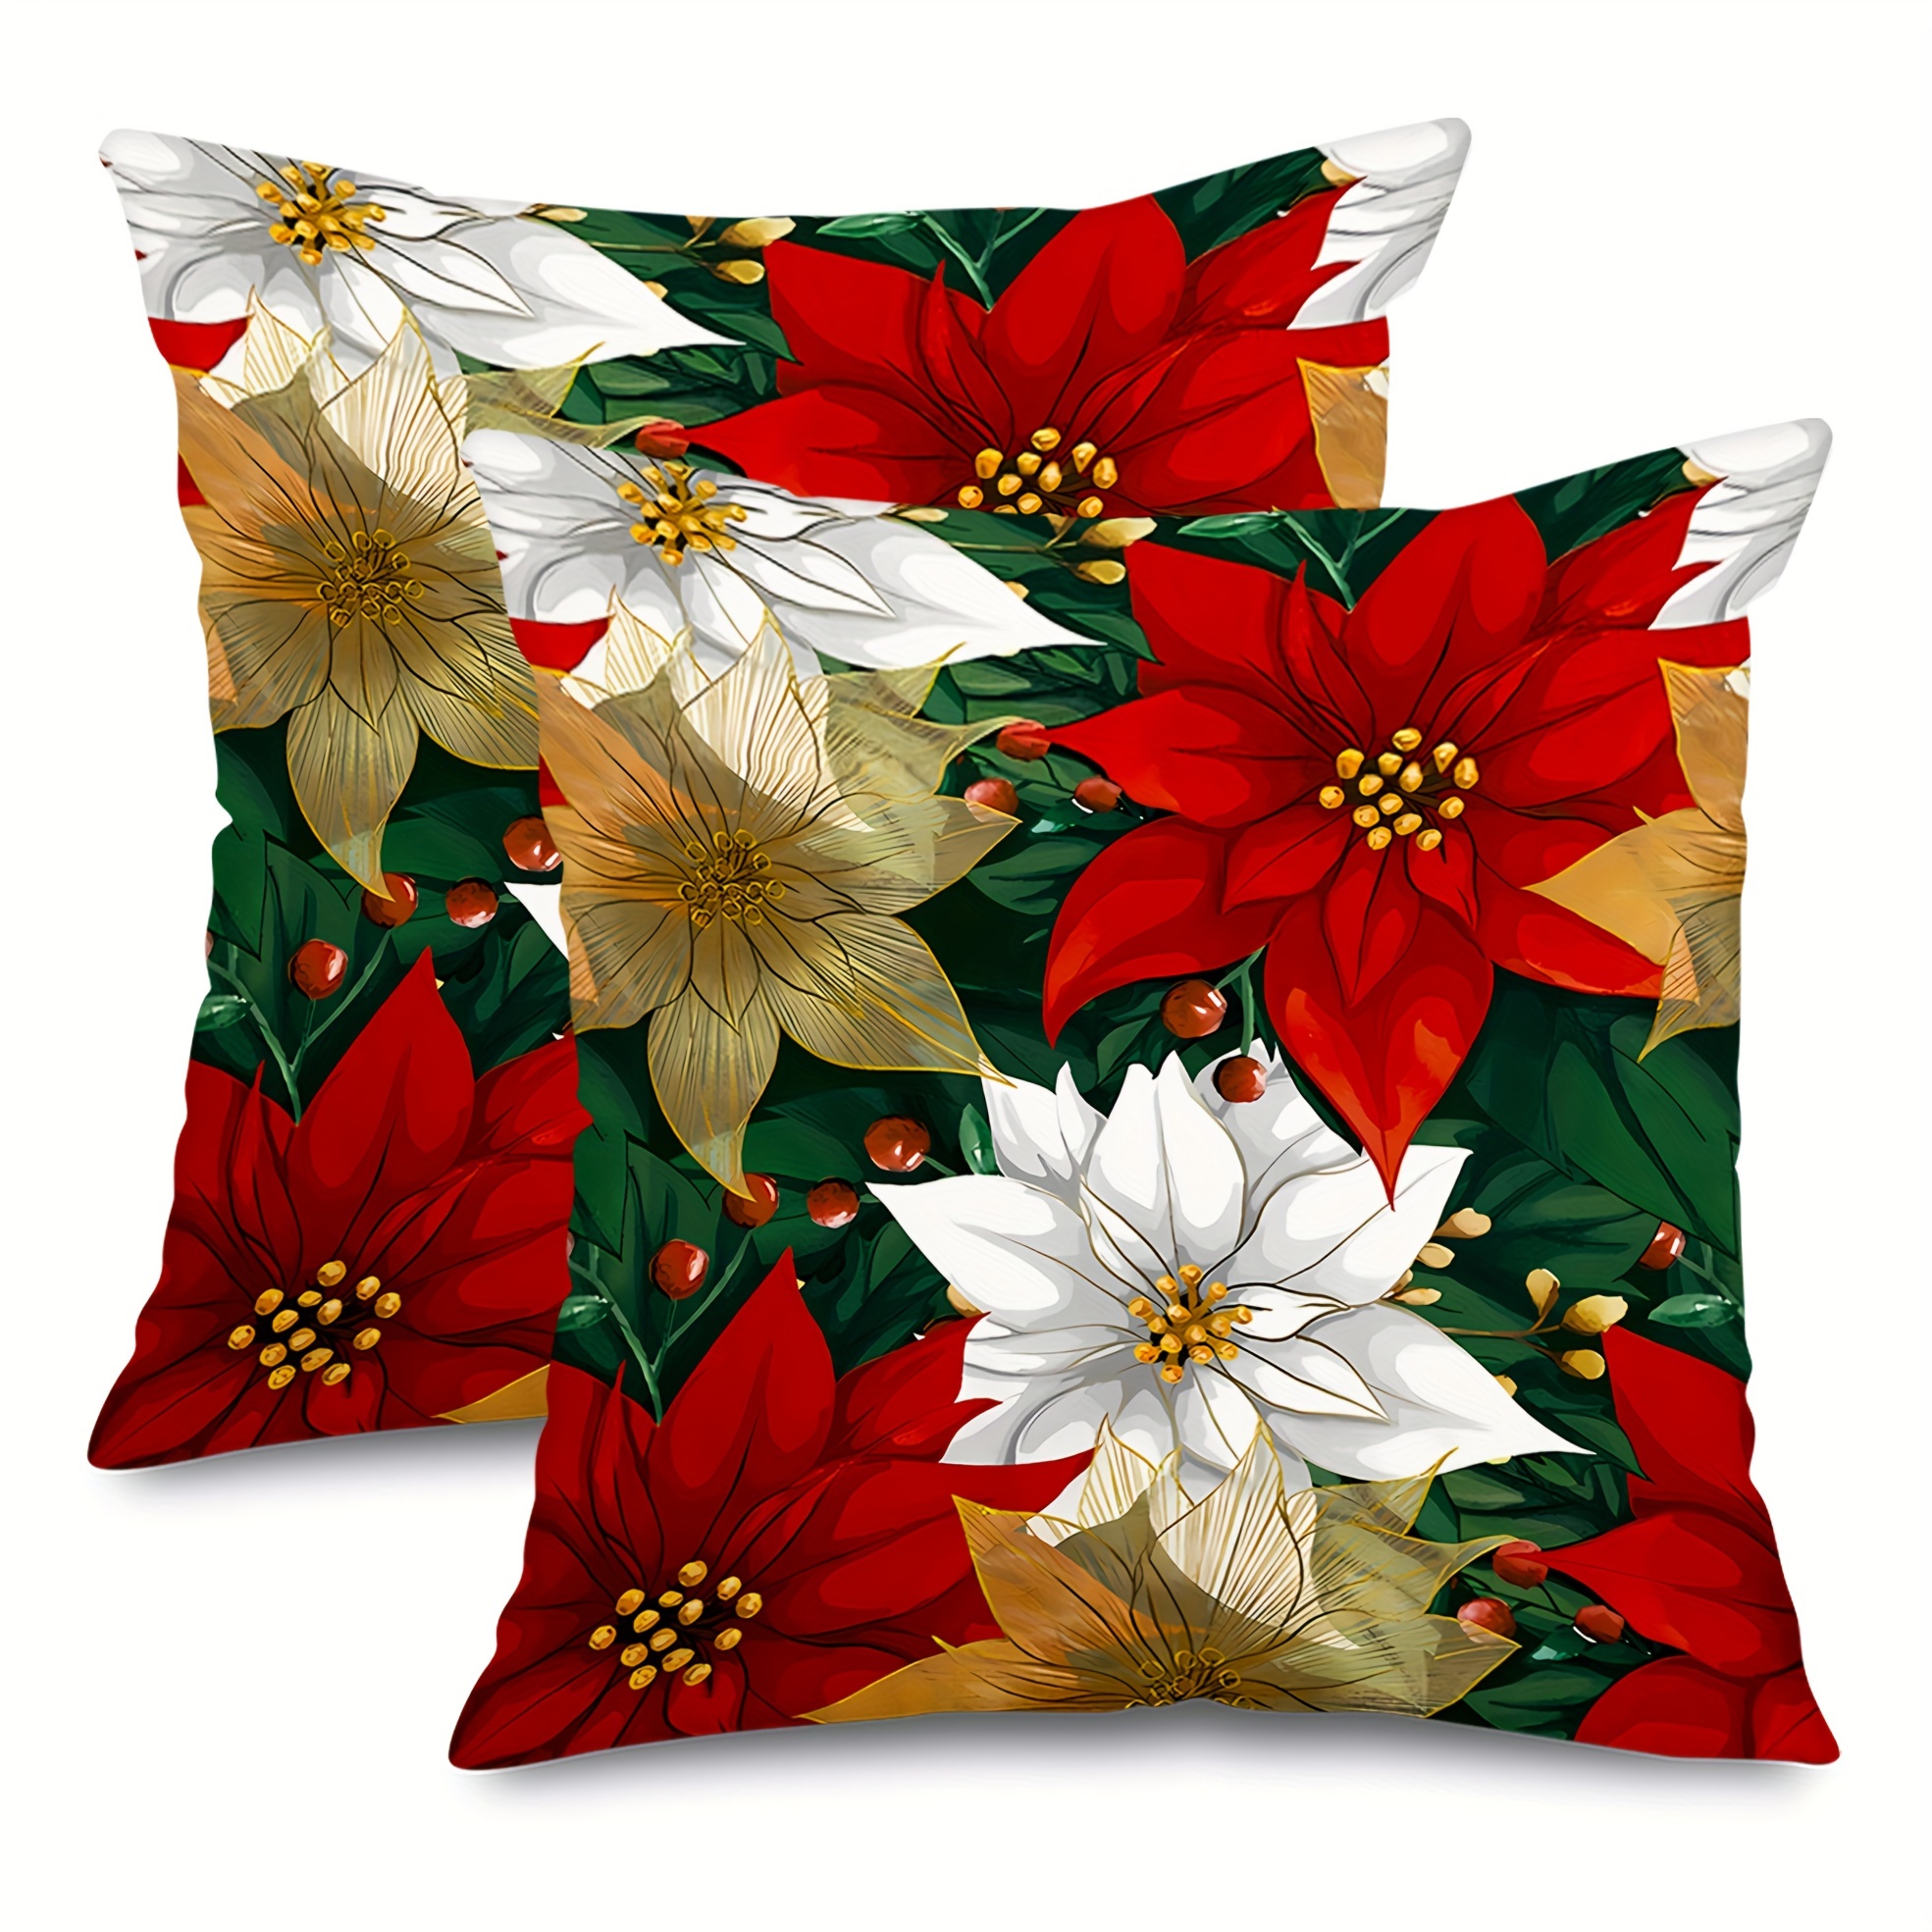 

2-pack Christmas Poinsettia Throw Pillow Covers, Contemporary Zippered Polyester Cushion Cases, Seasonal Xmas Flower Design, Machine Washable, For Home Decor - Single Sided Print (no Insert)